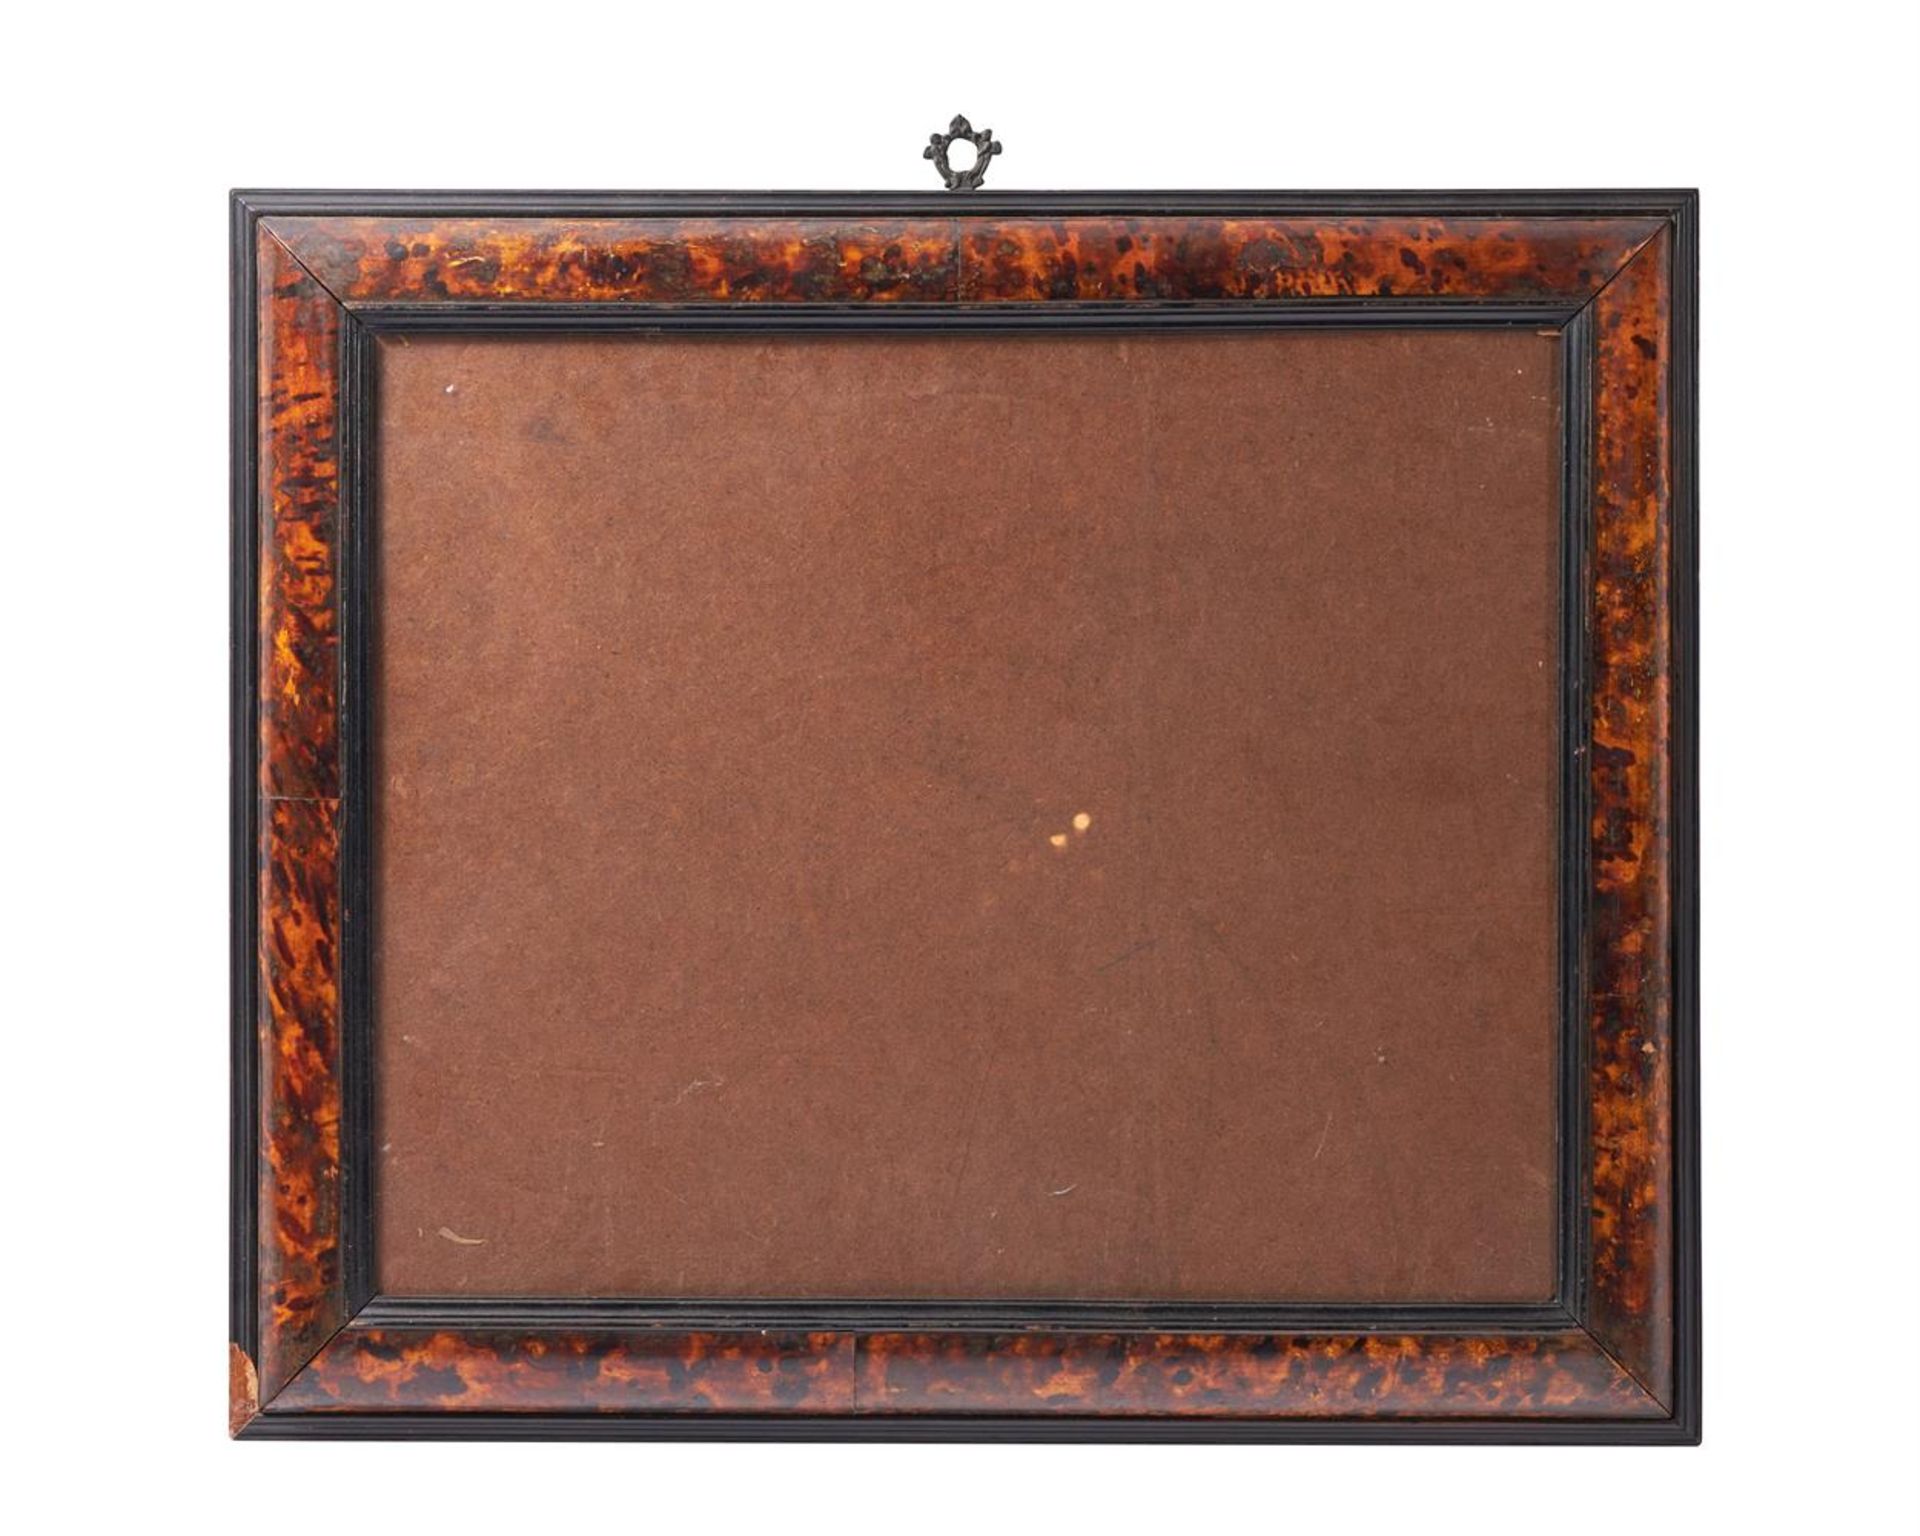 A TORTOISESHELL AND EBONISED FRAME IN 17TH CENTURY STYLE, 19TH CENTURY